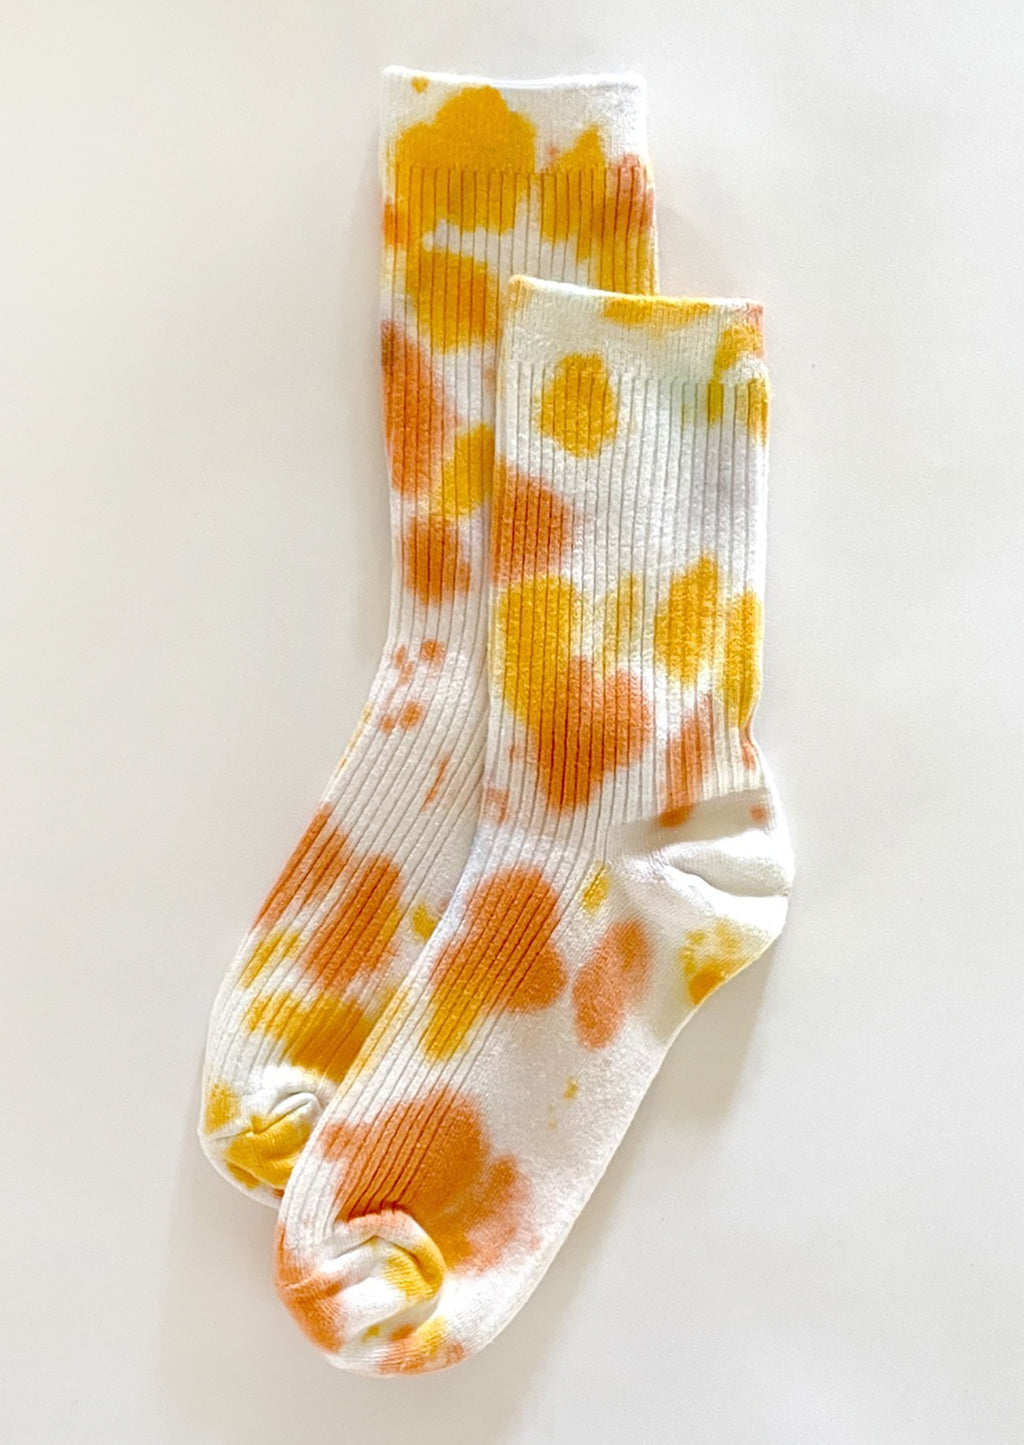 Daisy: A pair of tie dye socks in yellow and orange color.